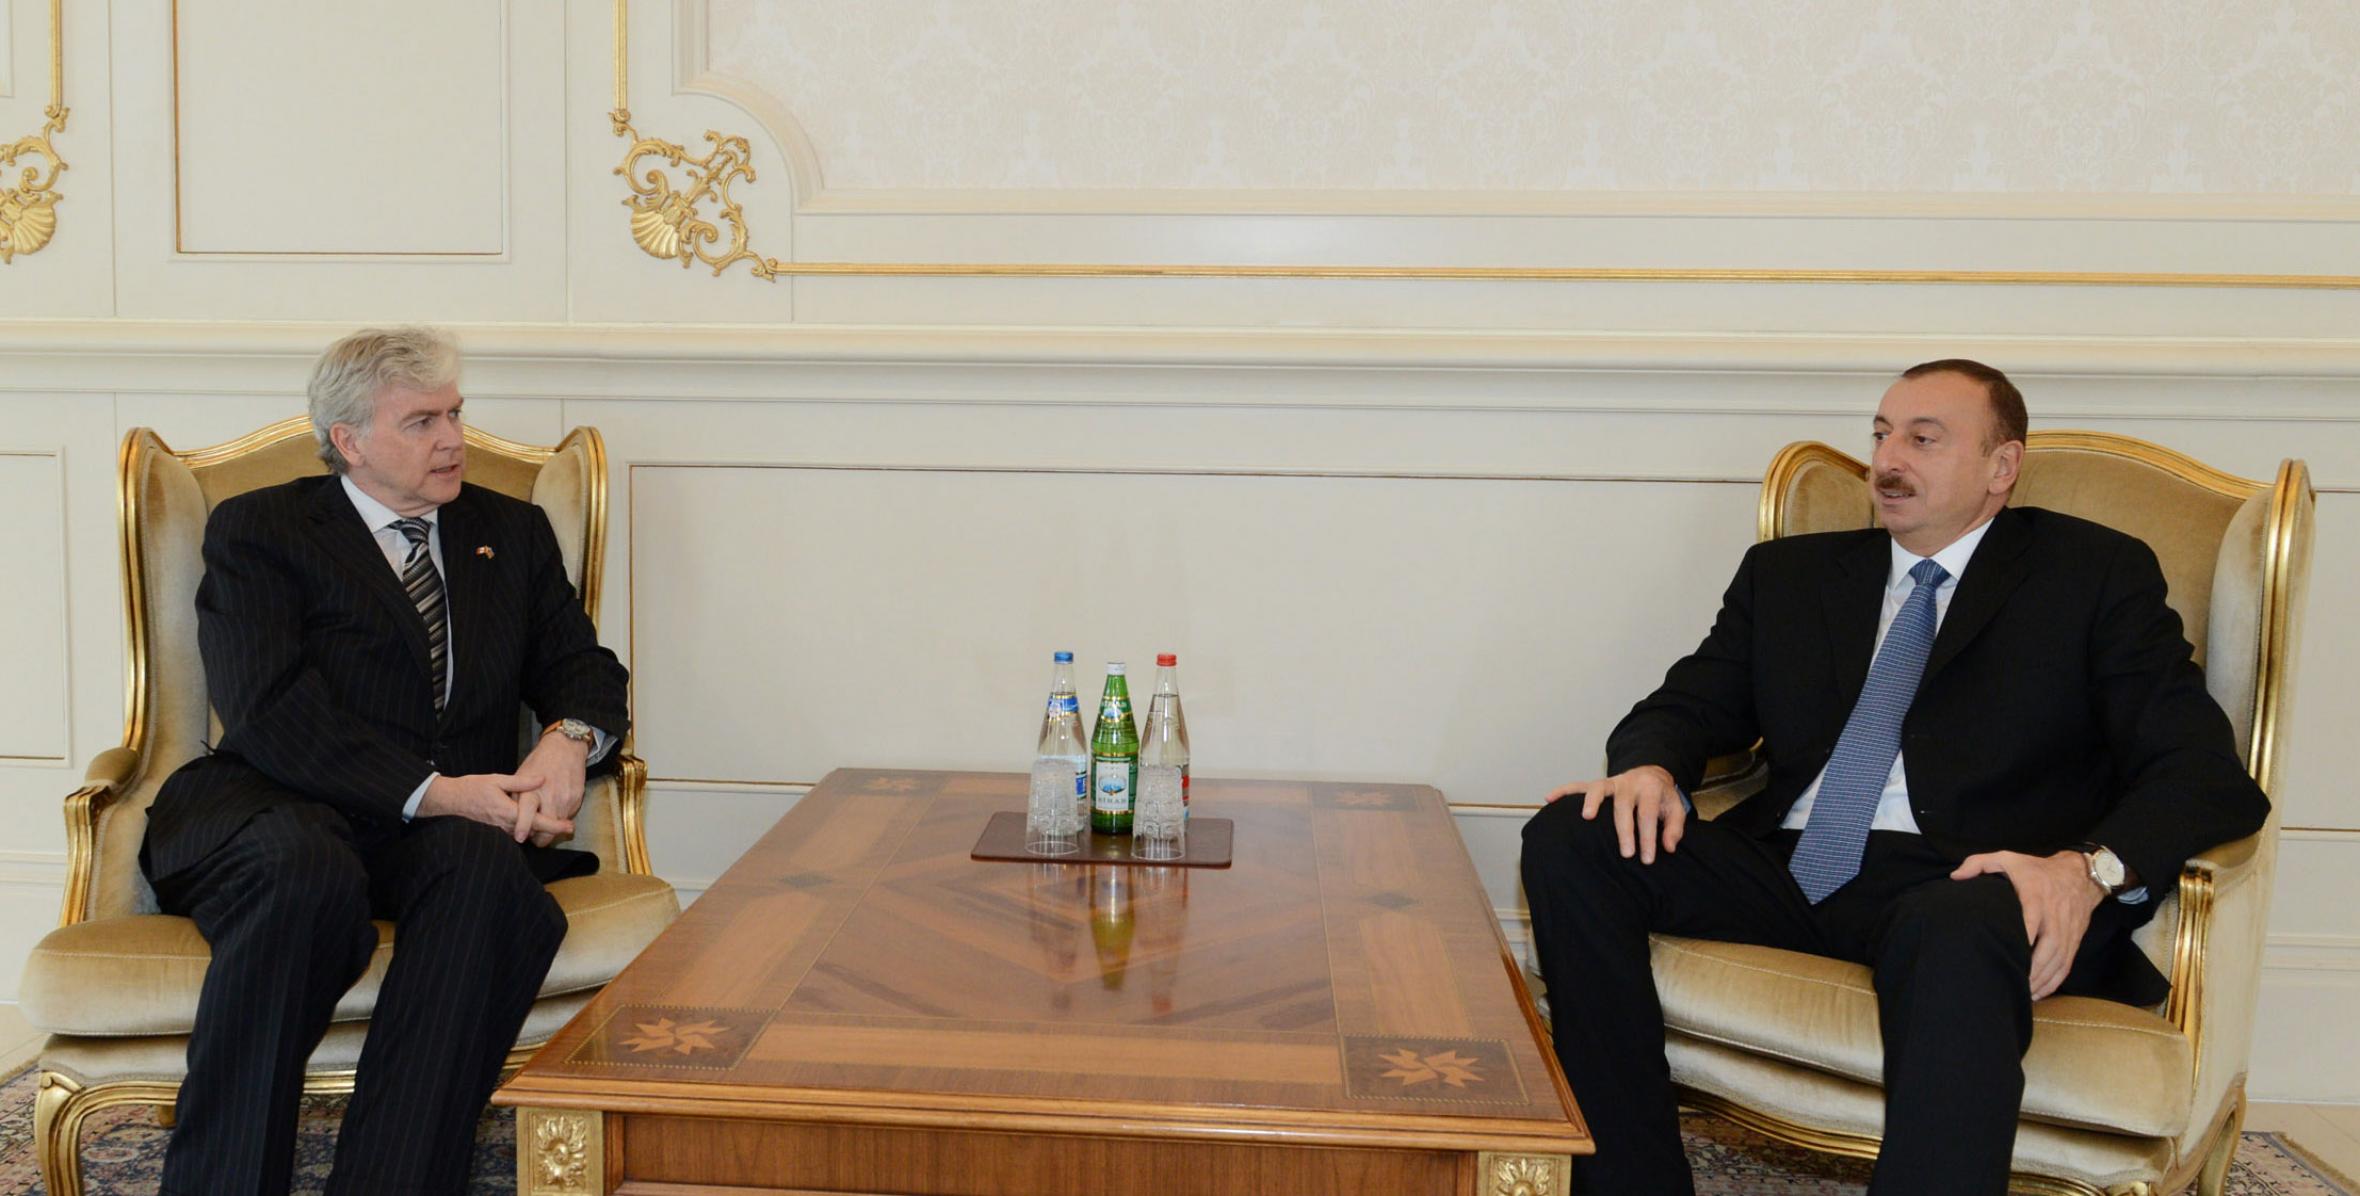 Ilham Aliyev accepted the credentials from the newly-appointed Ambassador of Canada to Azerbaijan